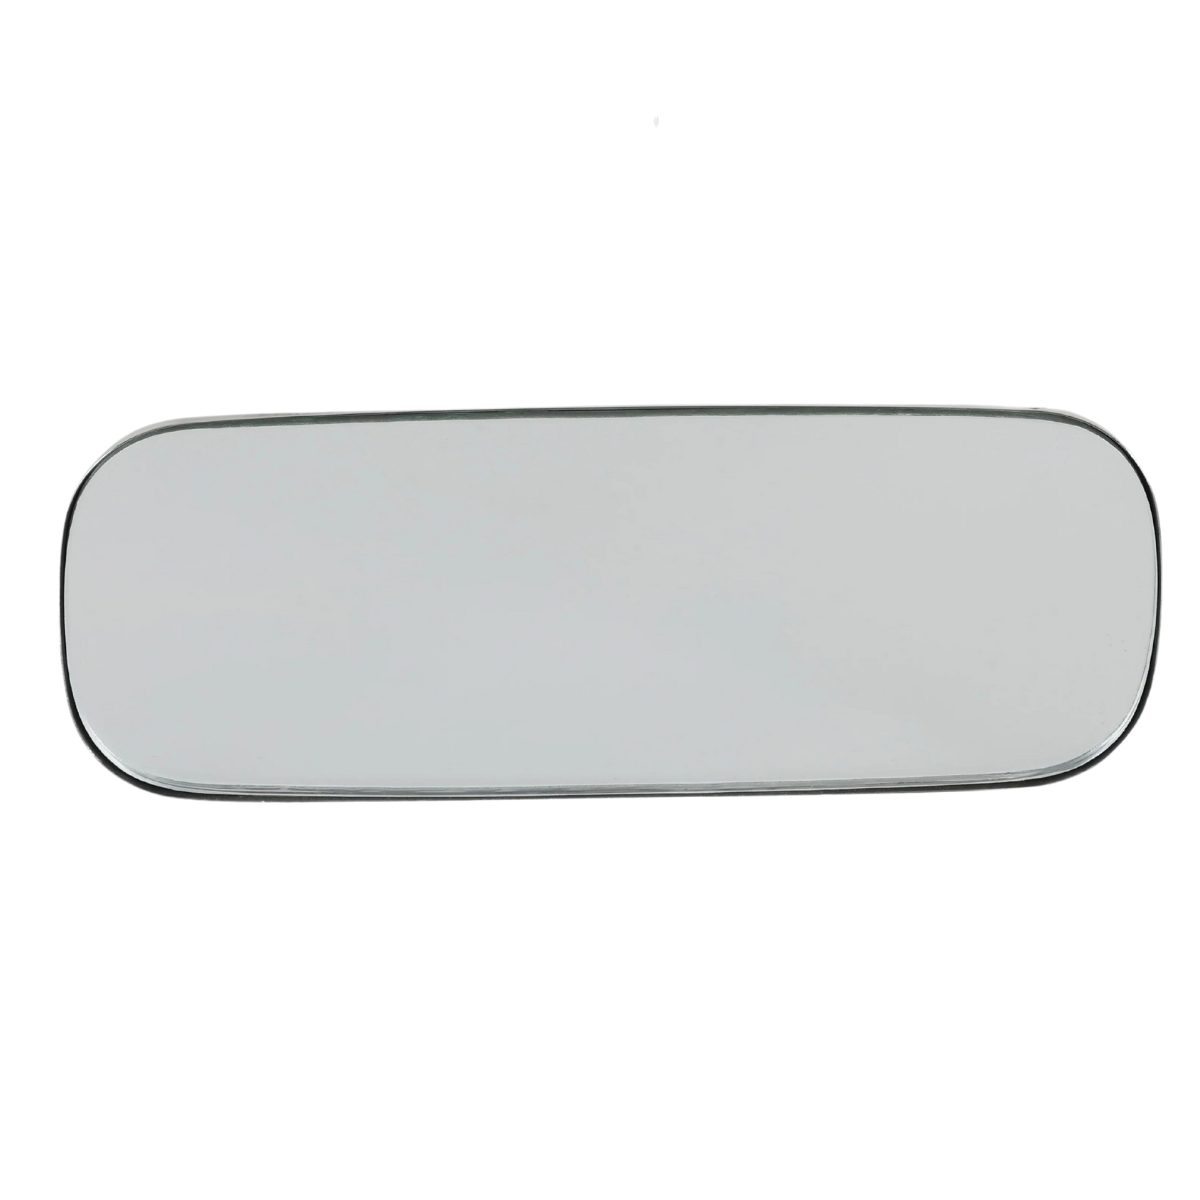 BROTHERS Interior Rear View Mirror C2004-60